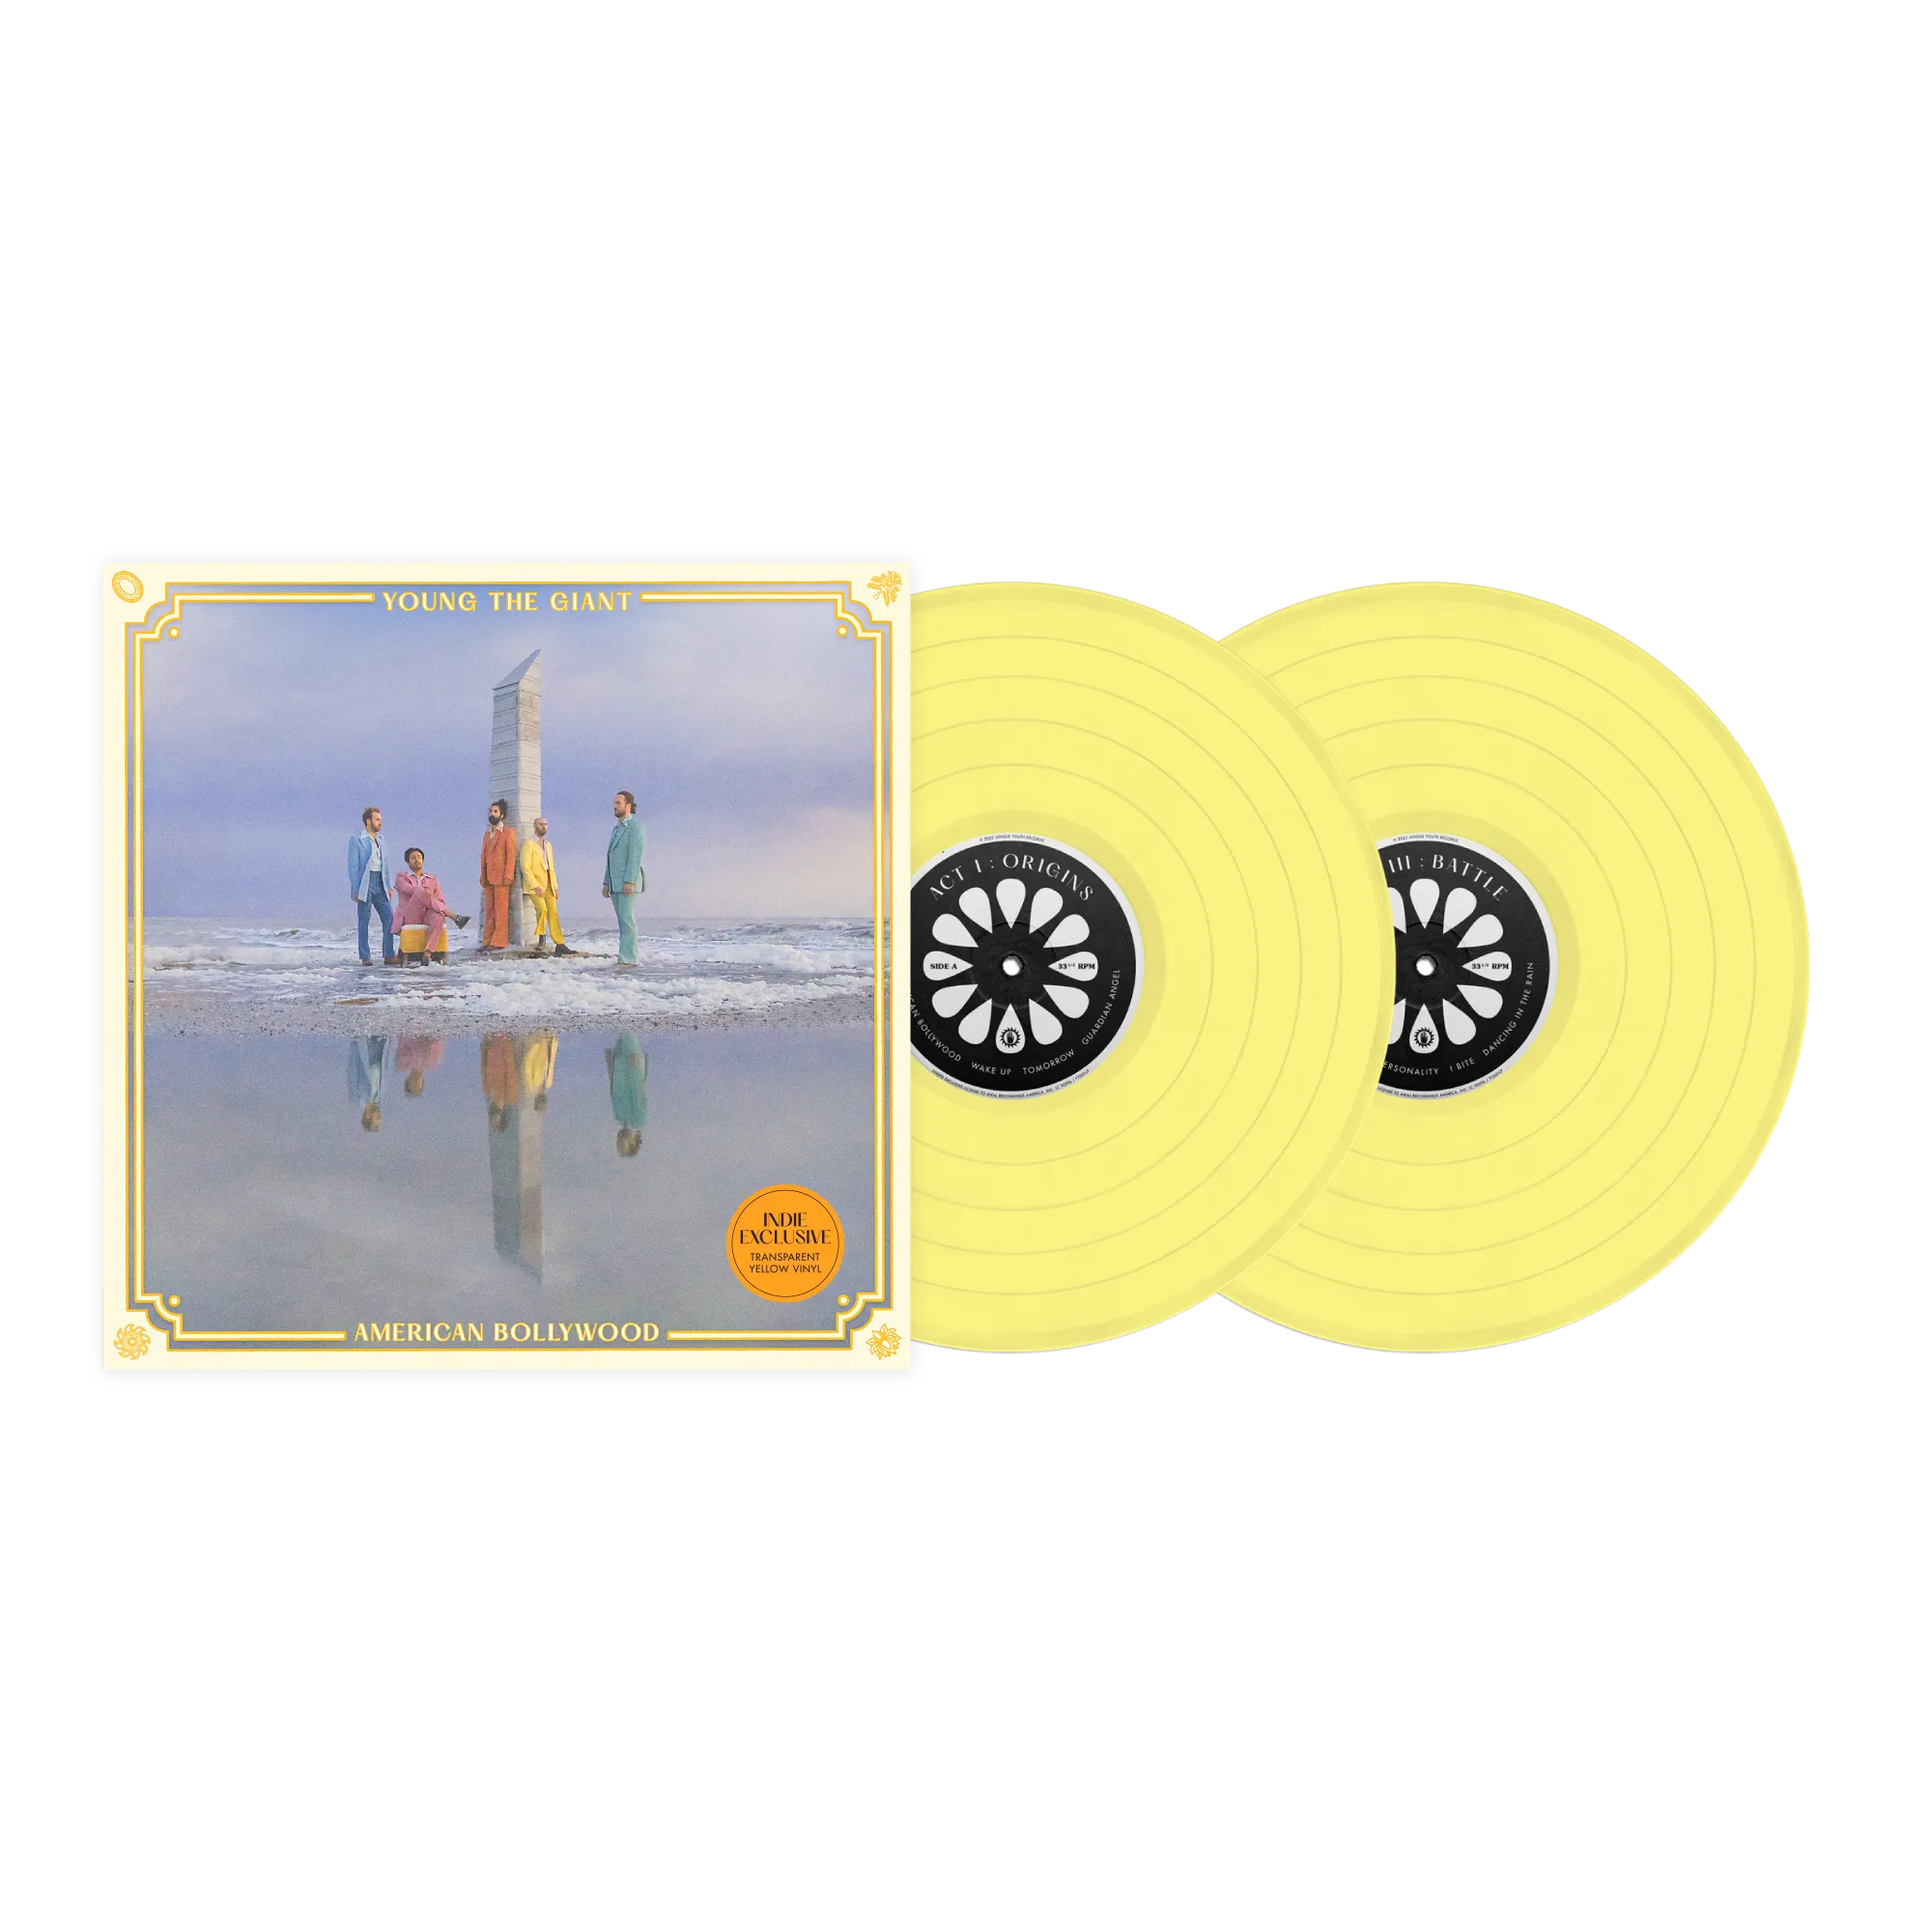 Young the Giant - American Bollywood (Ltd. Ed. Clear Yellow Vinyl) - Blind Tiger Record Club